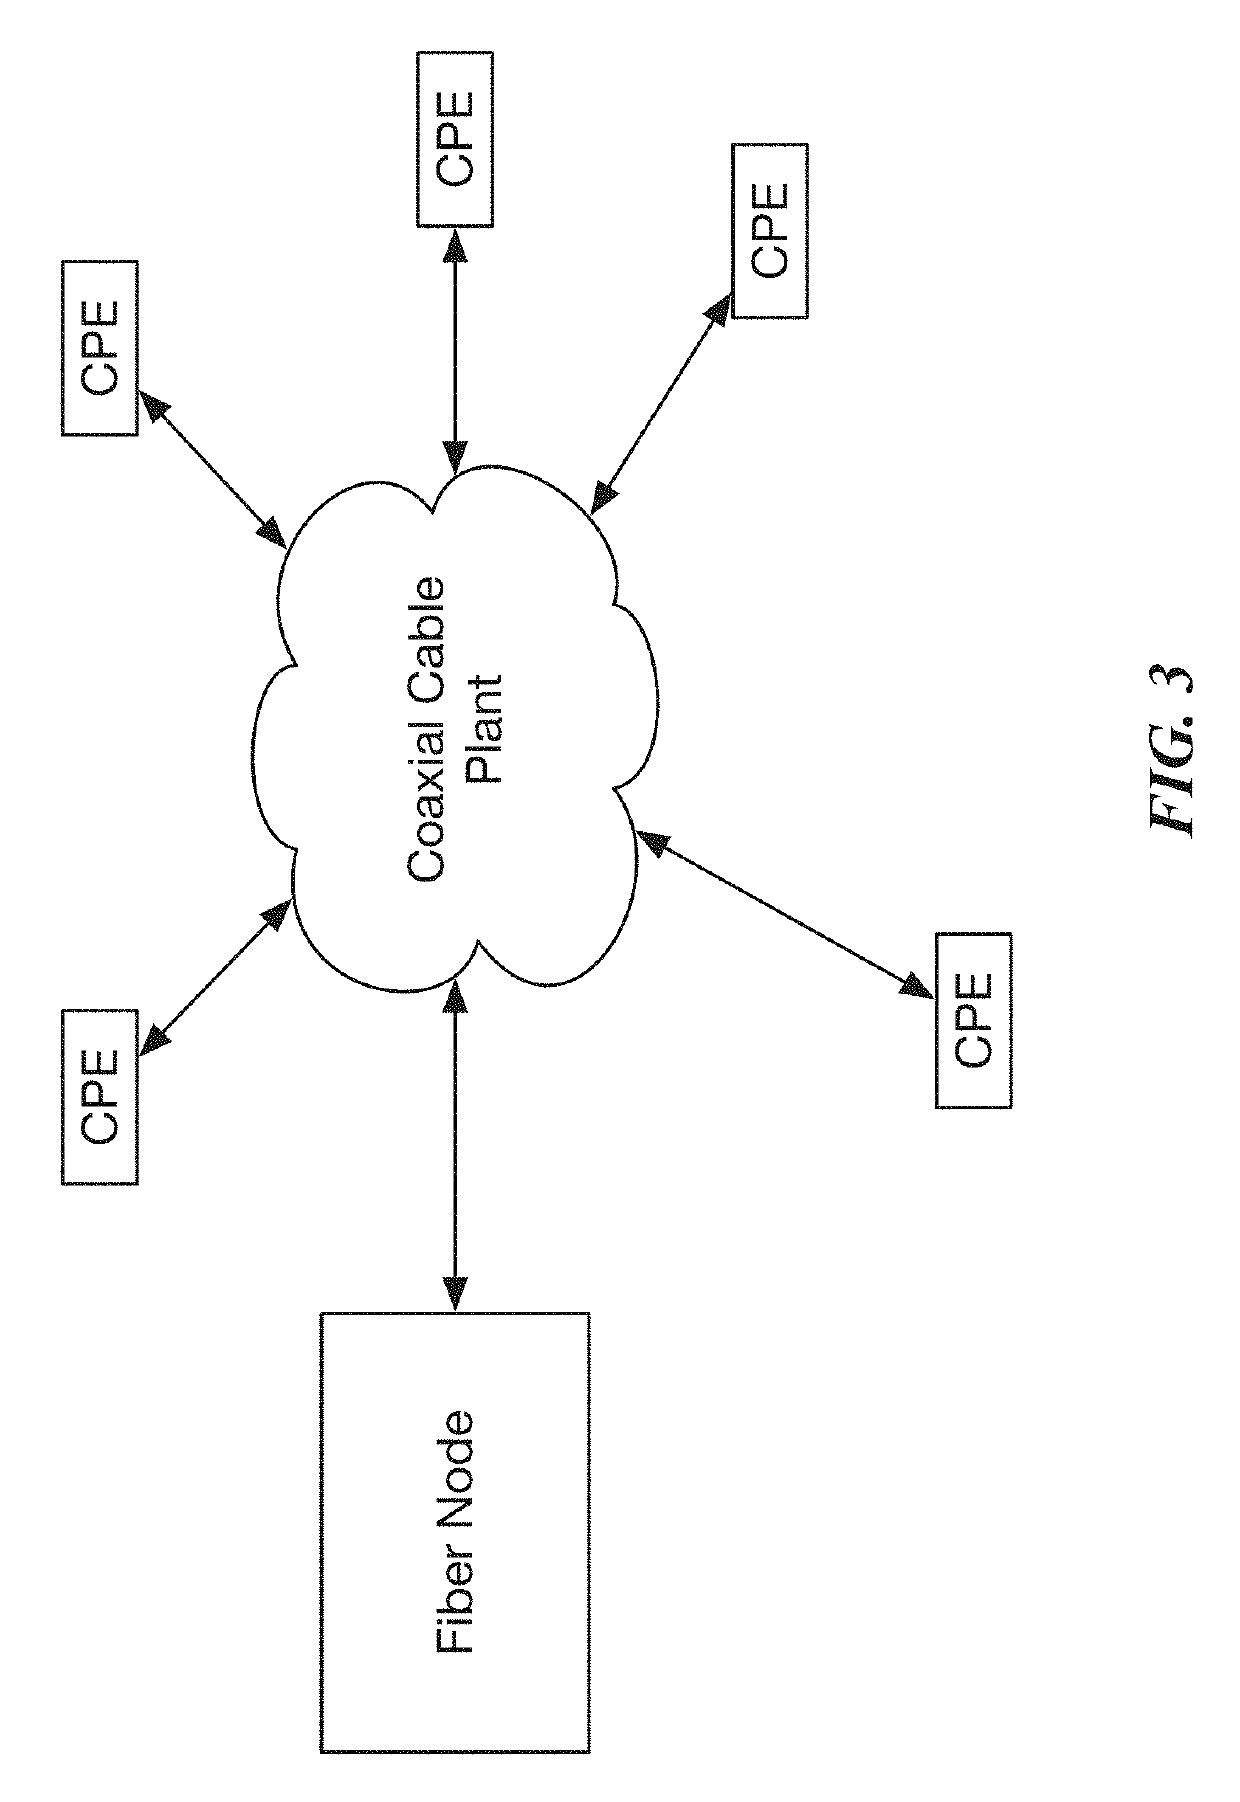 System for coordinative security across multi-level networks